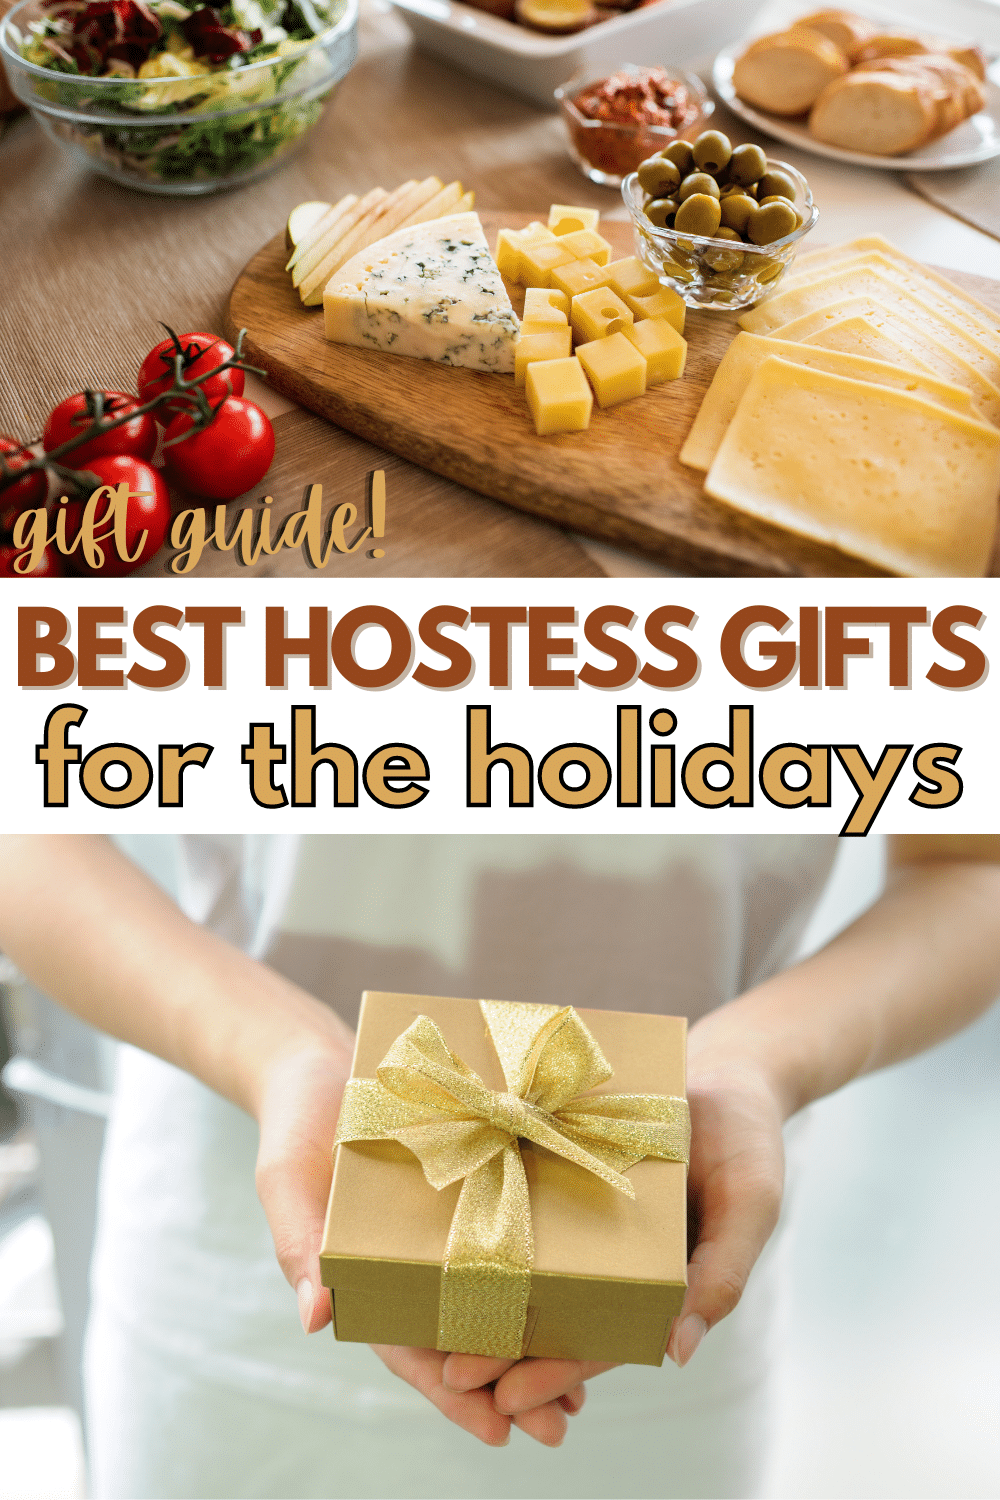 With the holidays approaching, you've likely got a full social calendar with lots of parties. Here are some ideas for the best hostess gifts. #giftguide #giftideas #hostessgift via @wondermomwannab